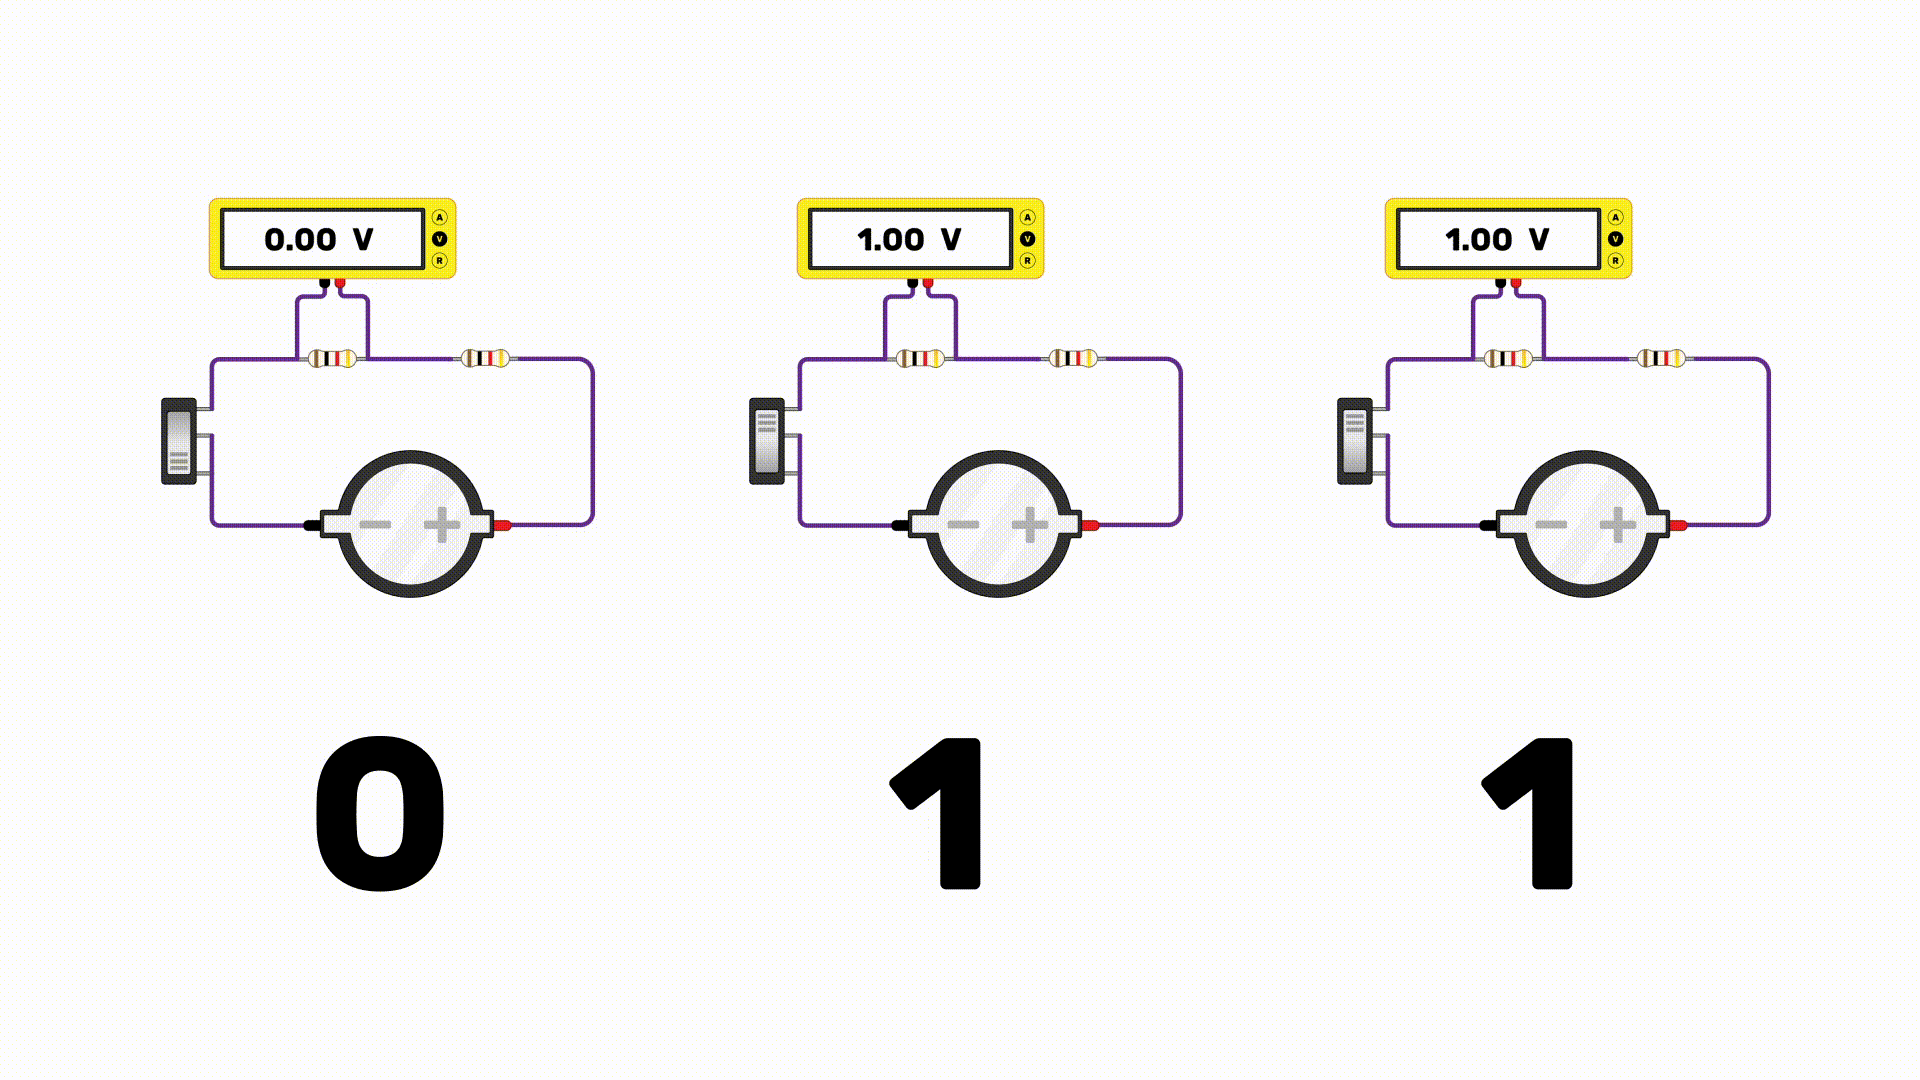 Circuits showing 1s and 0s